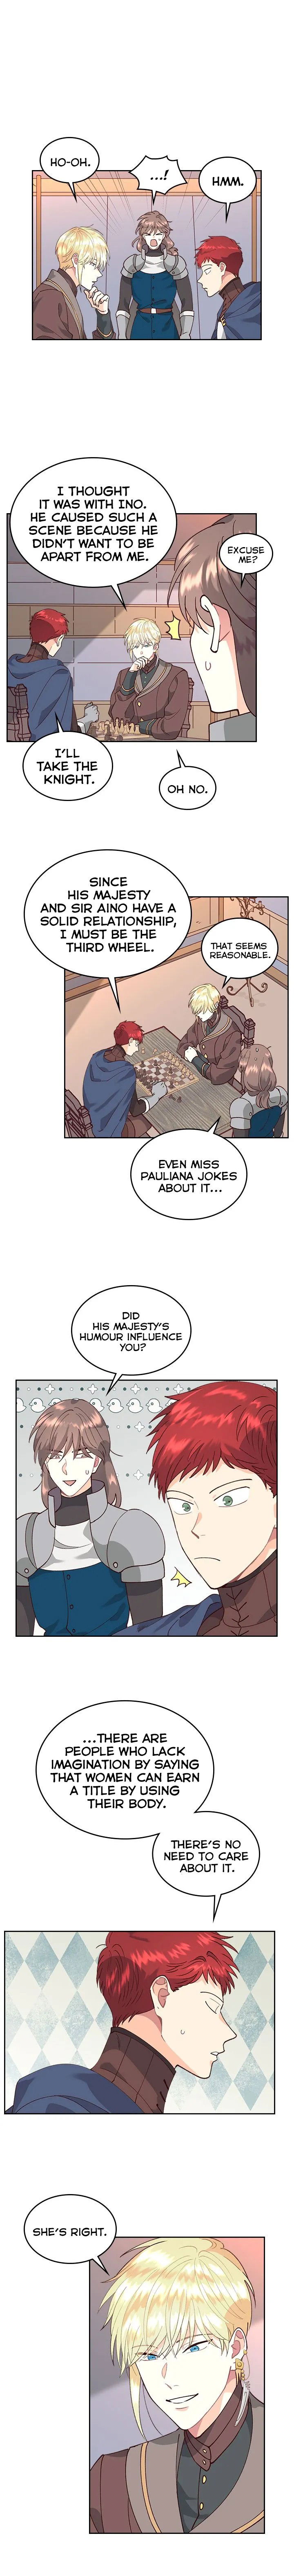 emperor-and-the-female-knight-chap-34-8